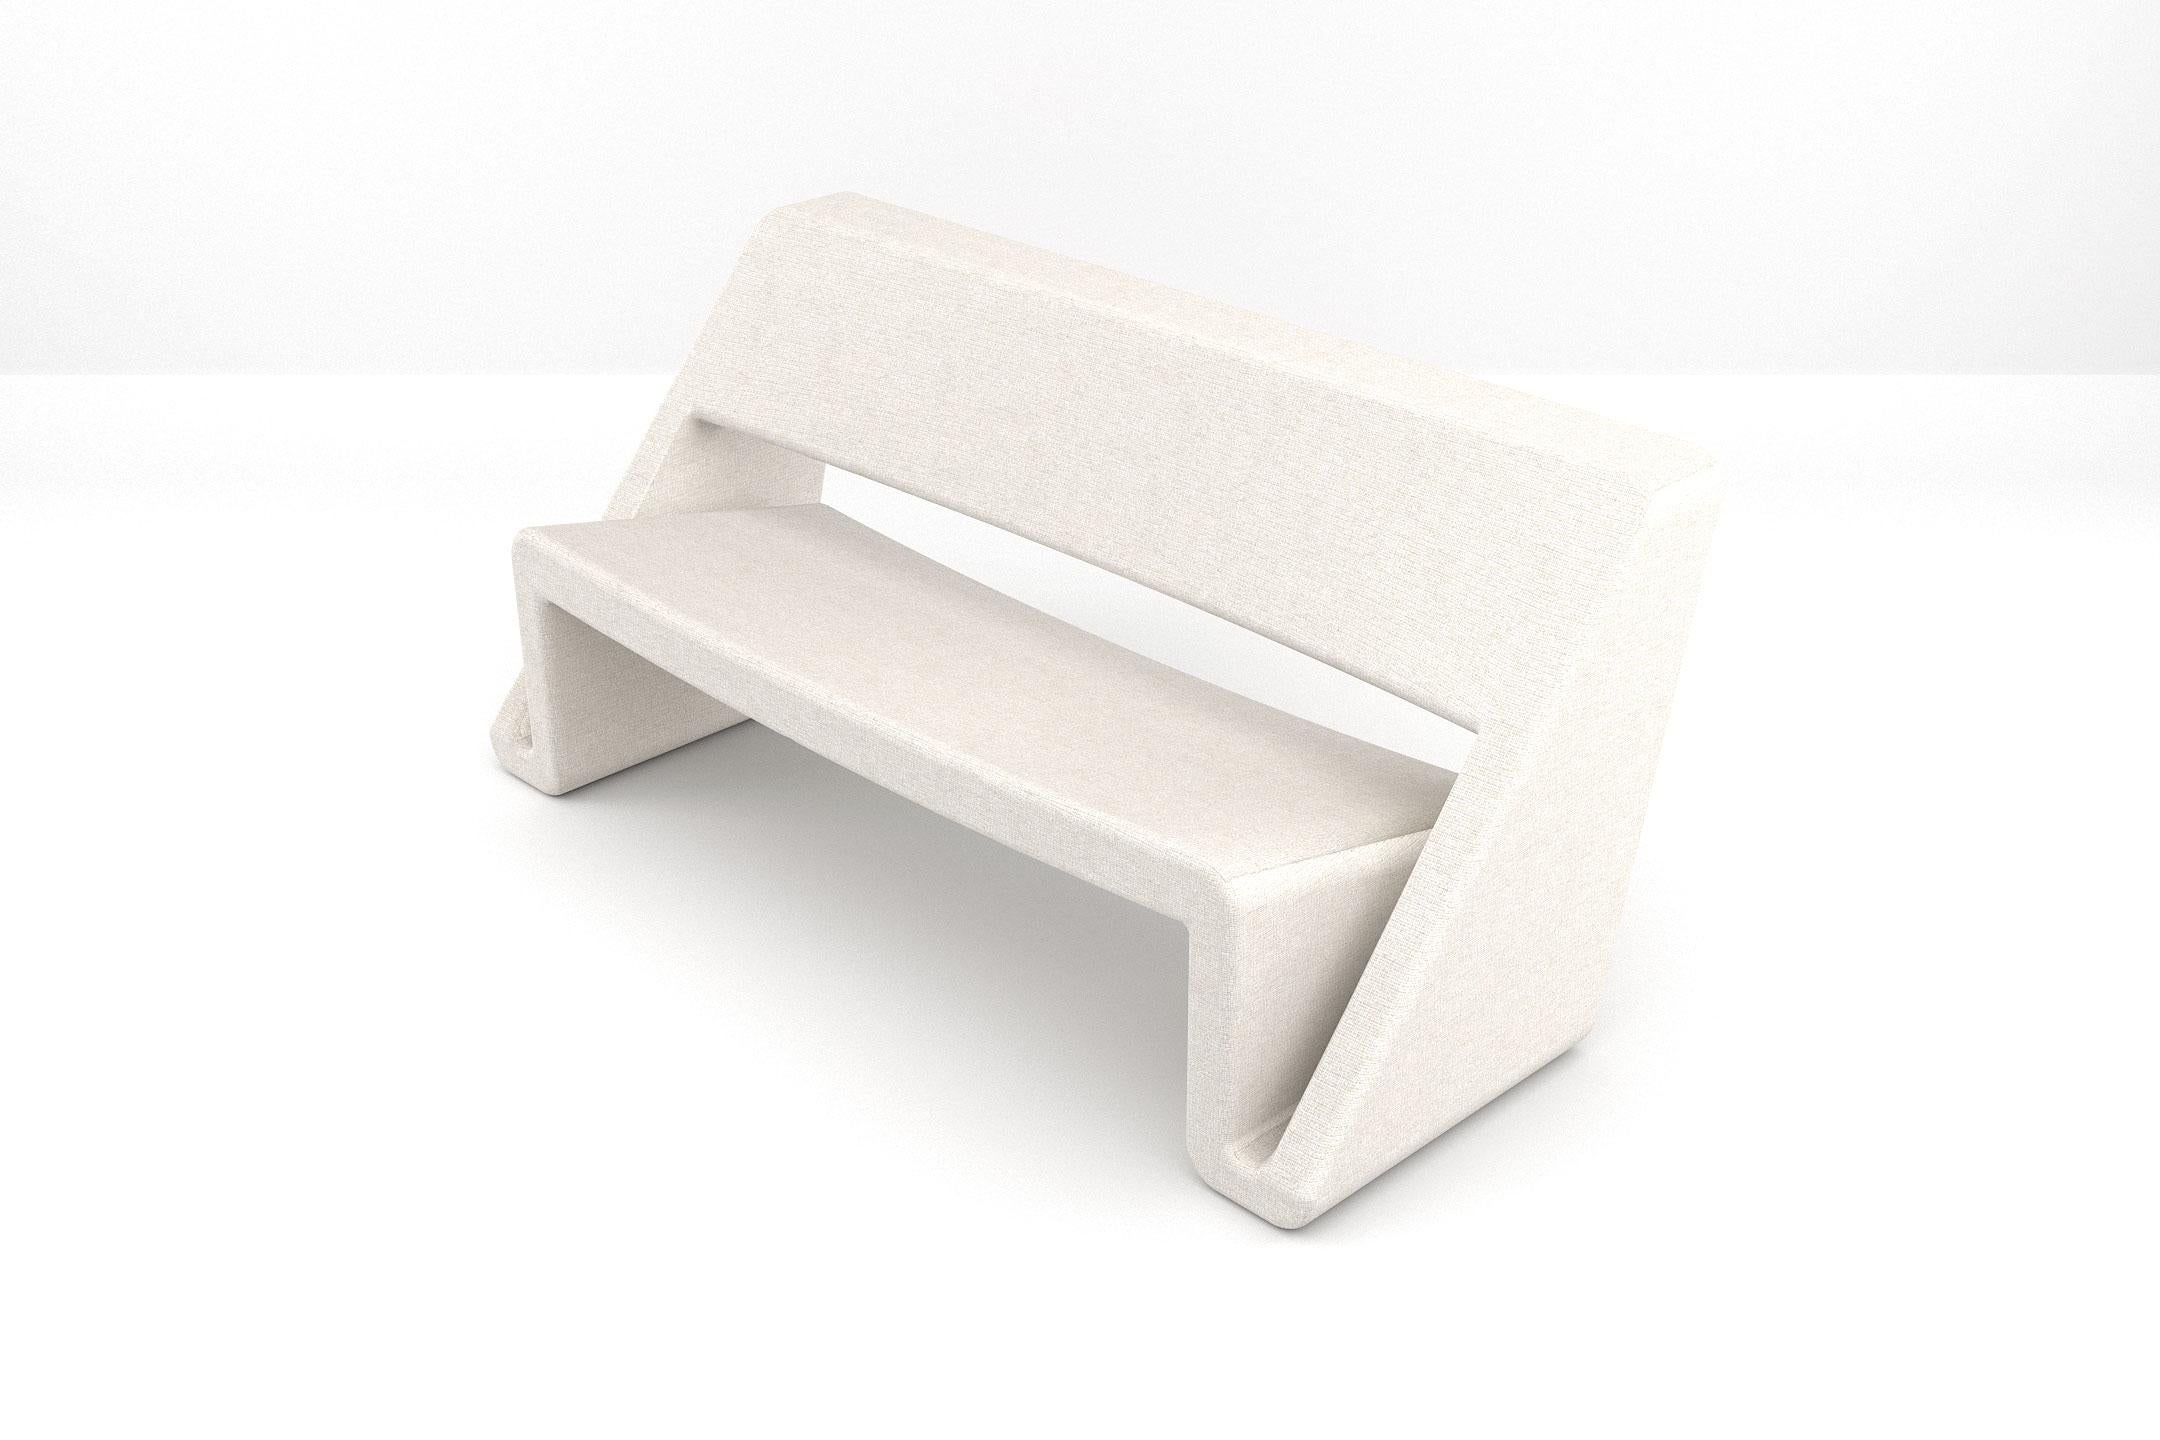 Contemporary Jet Sofa - Modern White Upholstered Two Seat Sofa For Sale